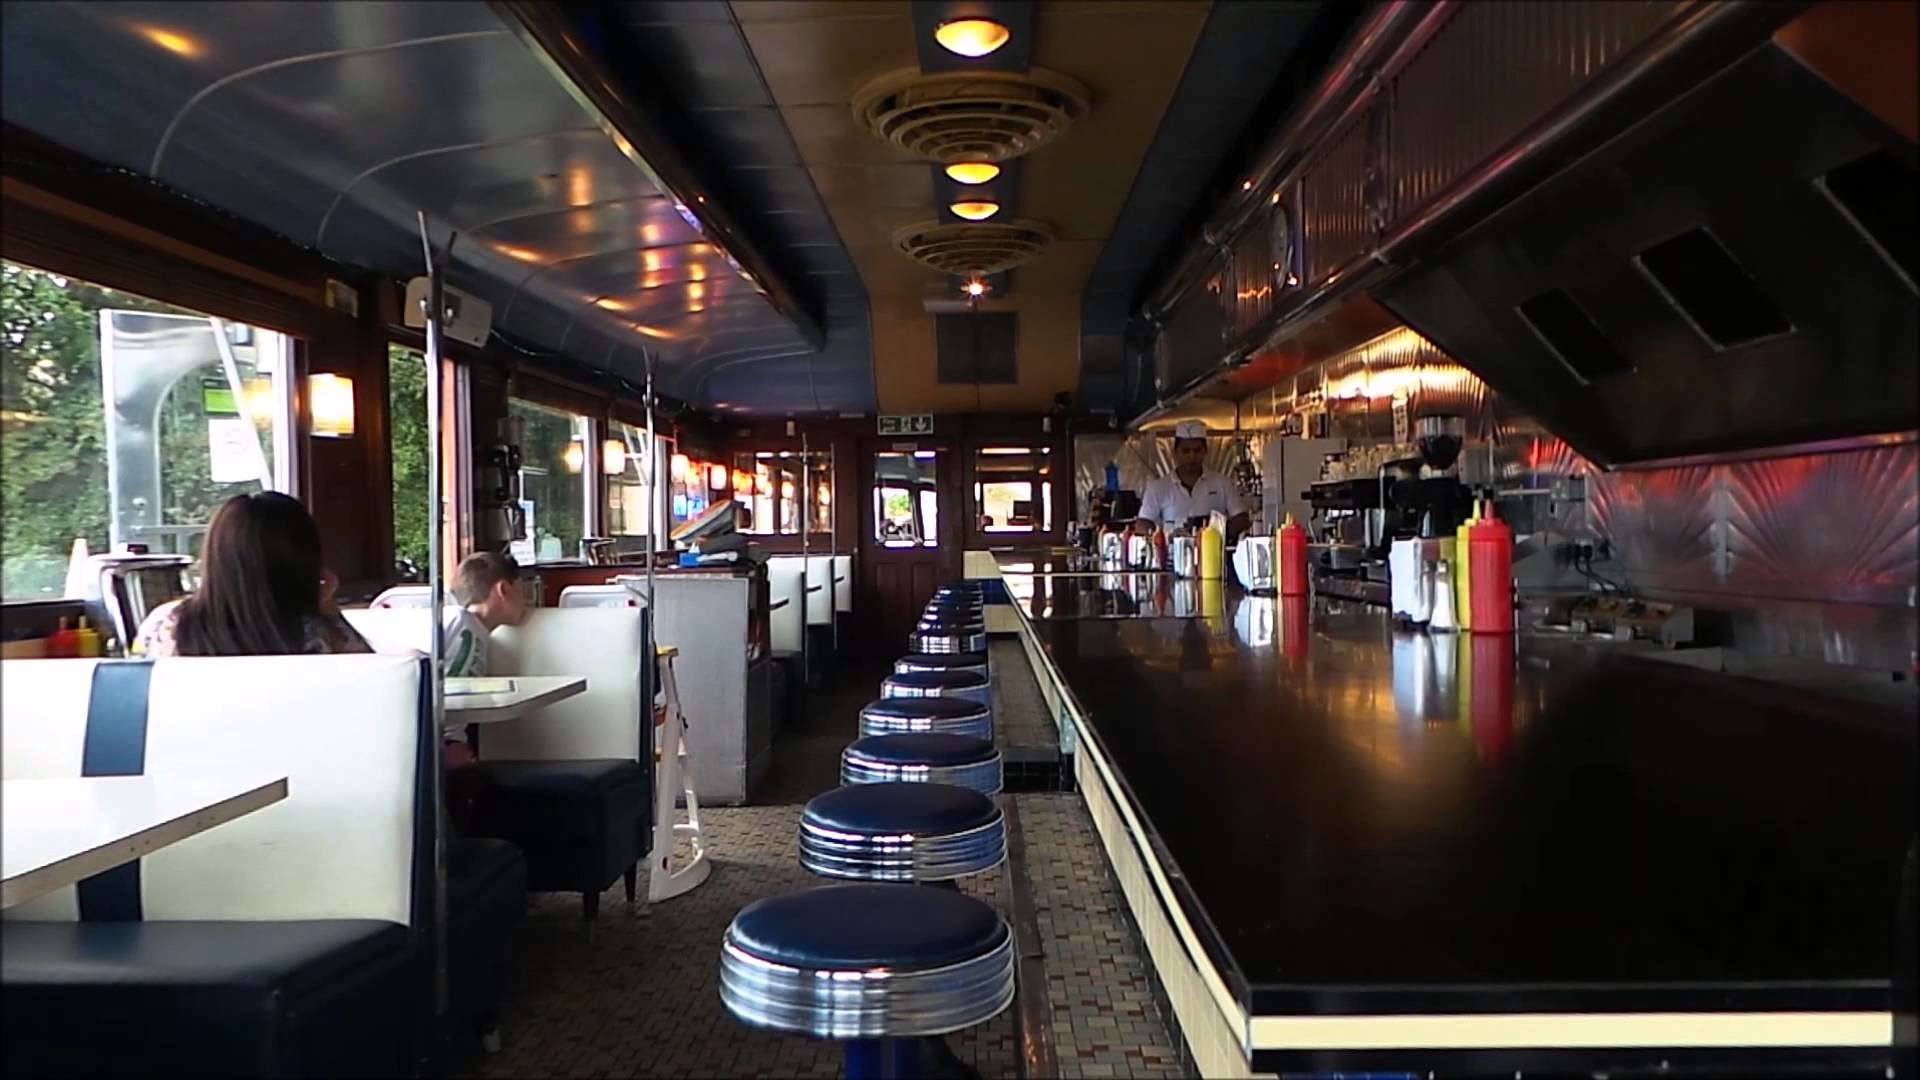 1920x1080 The American Restaurant The Riverview Diner in Ashford Kent. Have you been  here ?